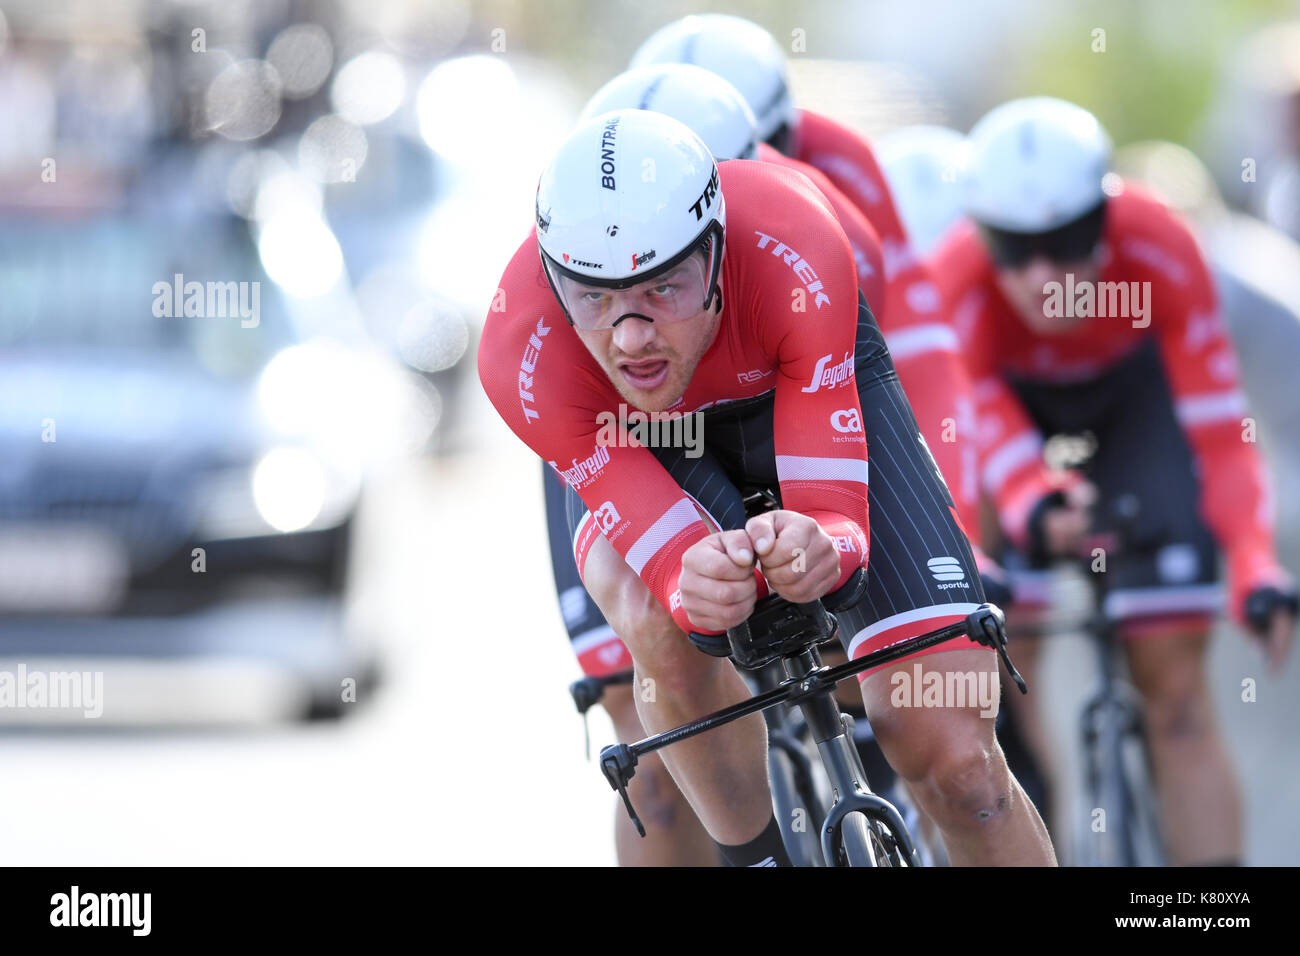 Only an 12th. place at the Team Time Trial event in Bergen Norway on the opening day of the Cycling Road World Championship for the Trek-Segafredo team. Here Matthias Brandle pulls in front 24km into the race. Stock Photo